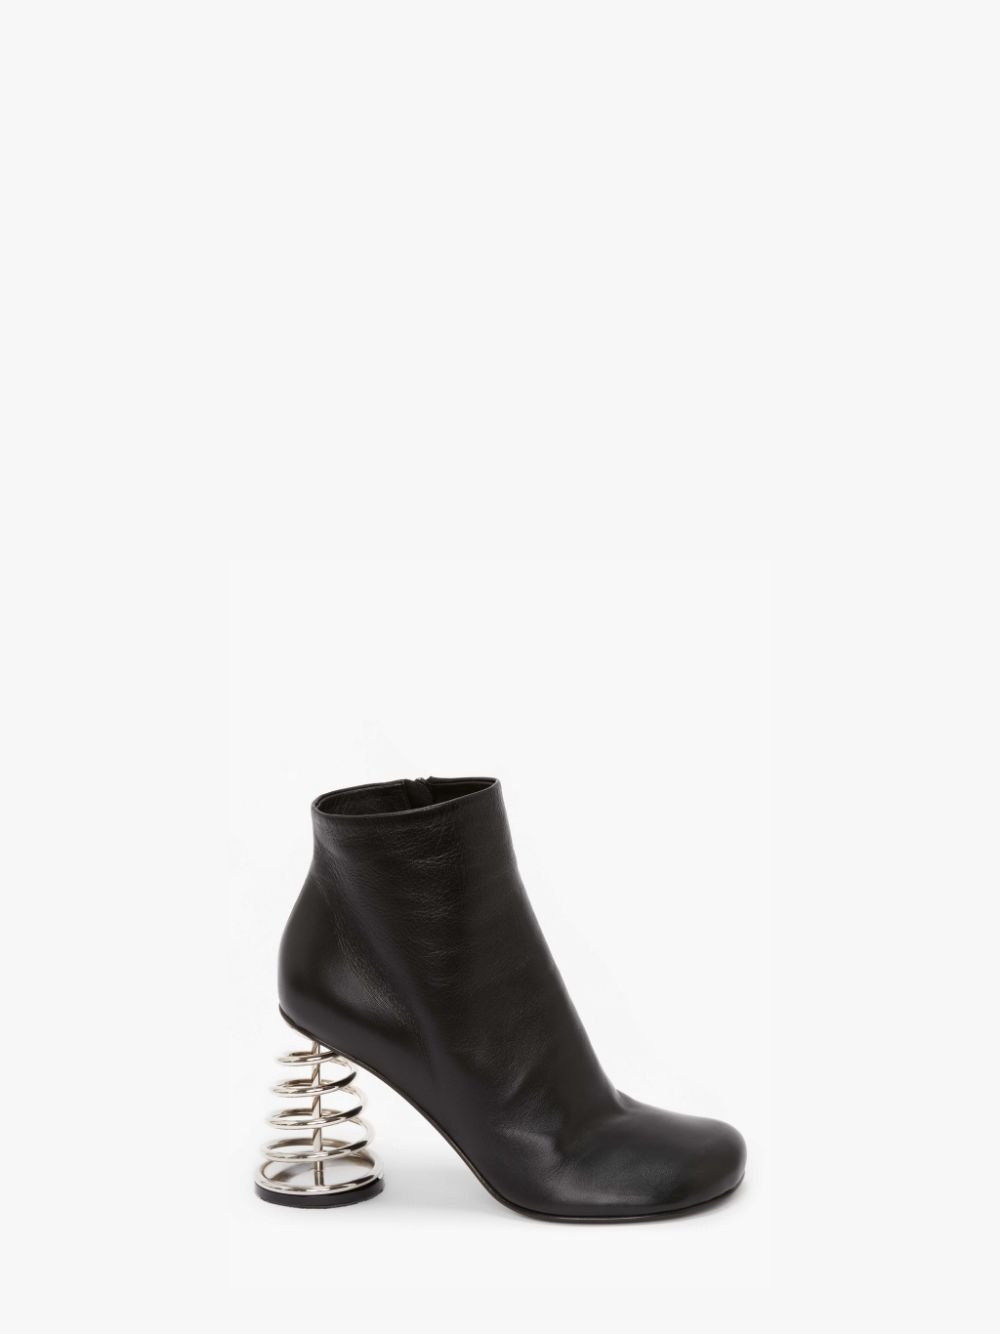 LEATHER SPIRAL HEEL ANKLE BOOT - 1